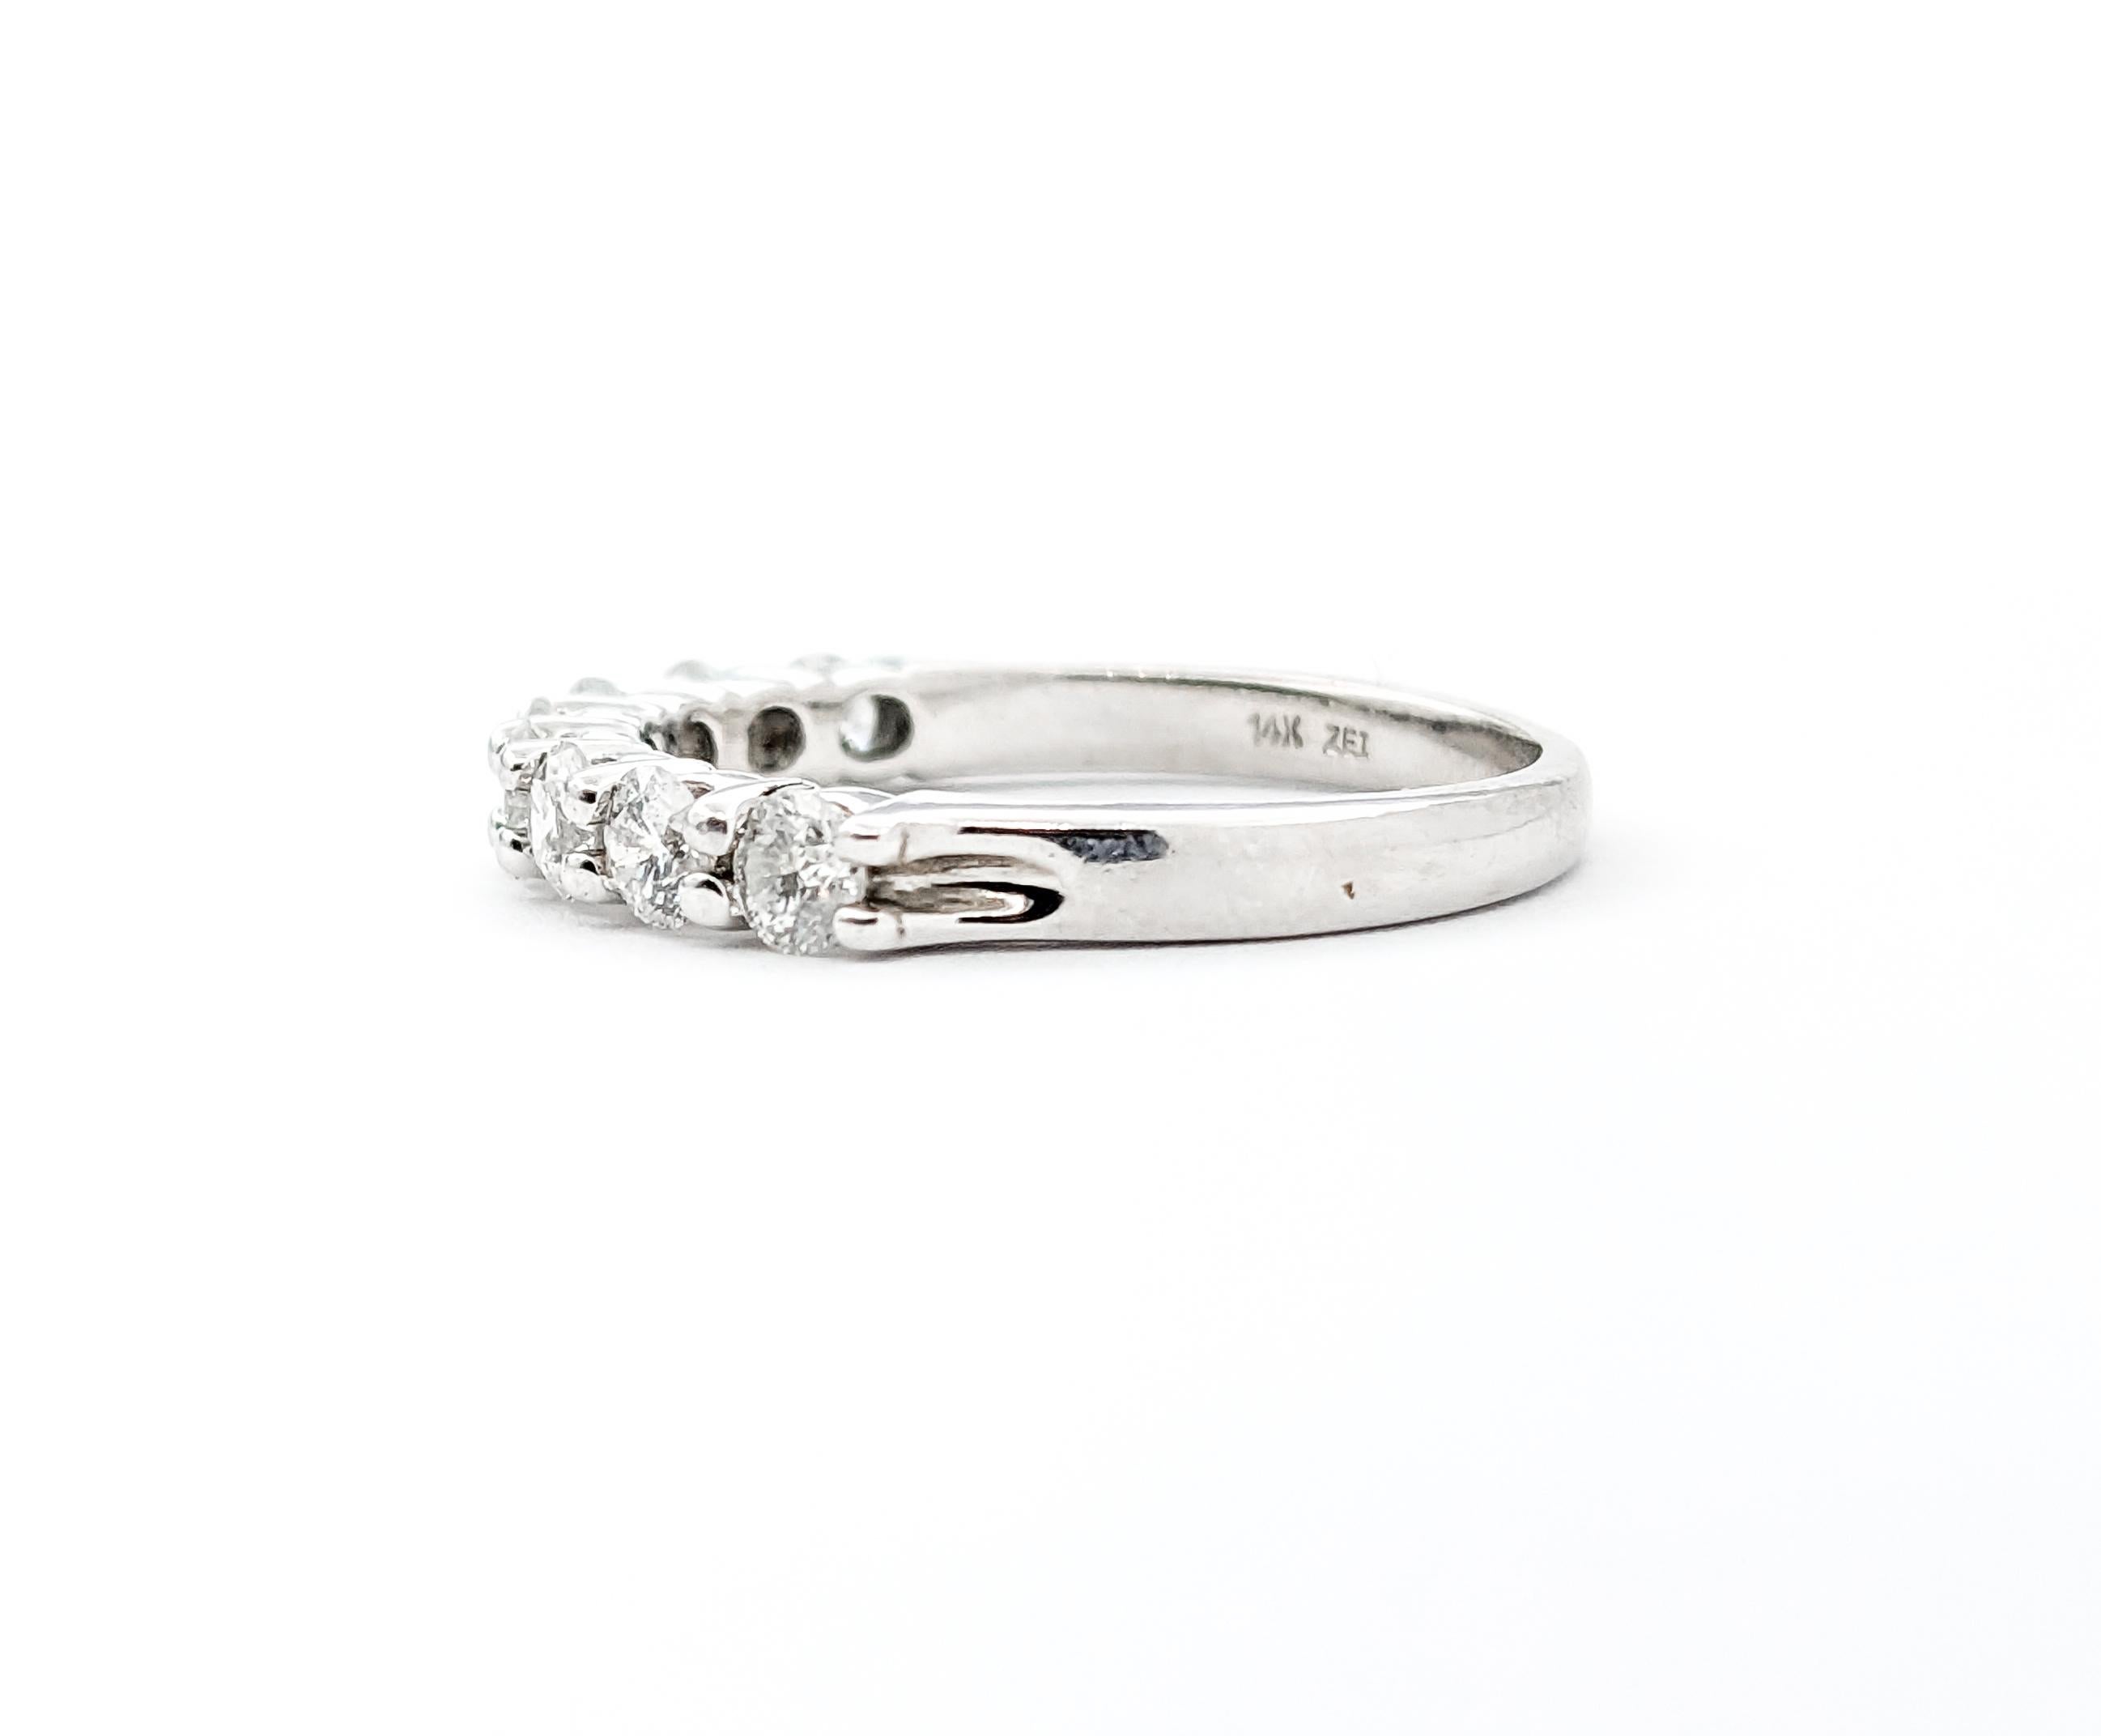 1ctw Diamond Bridal Ring In White Gold For Sale 3